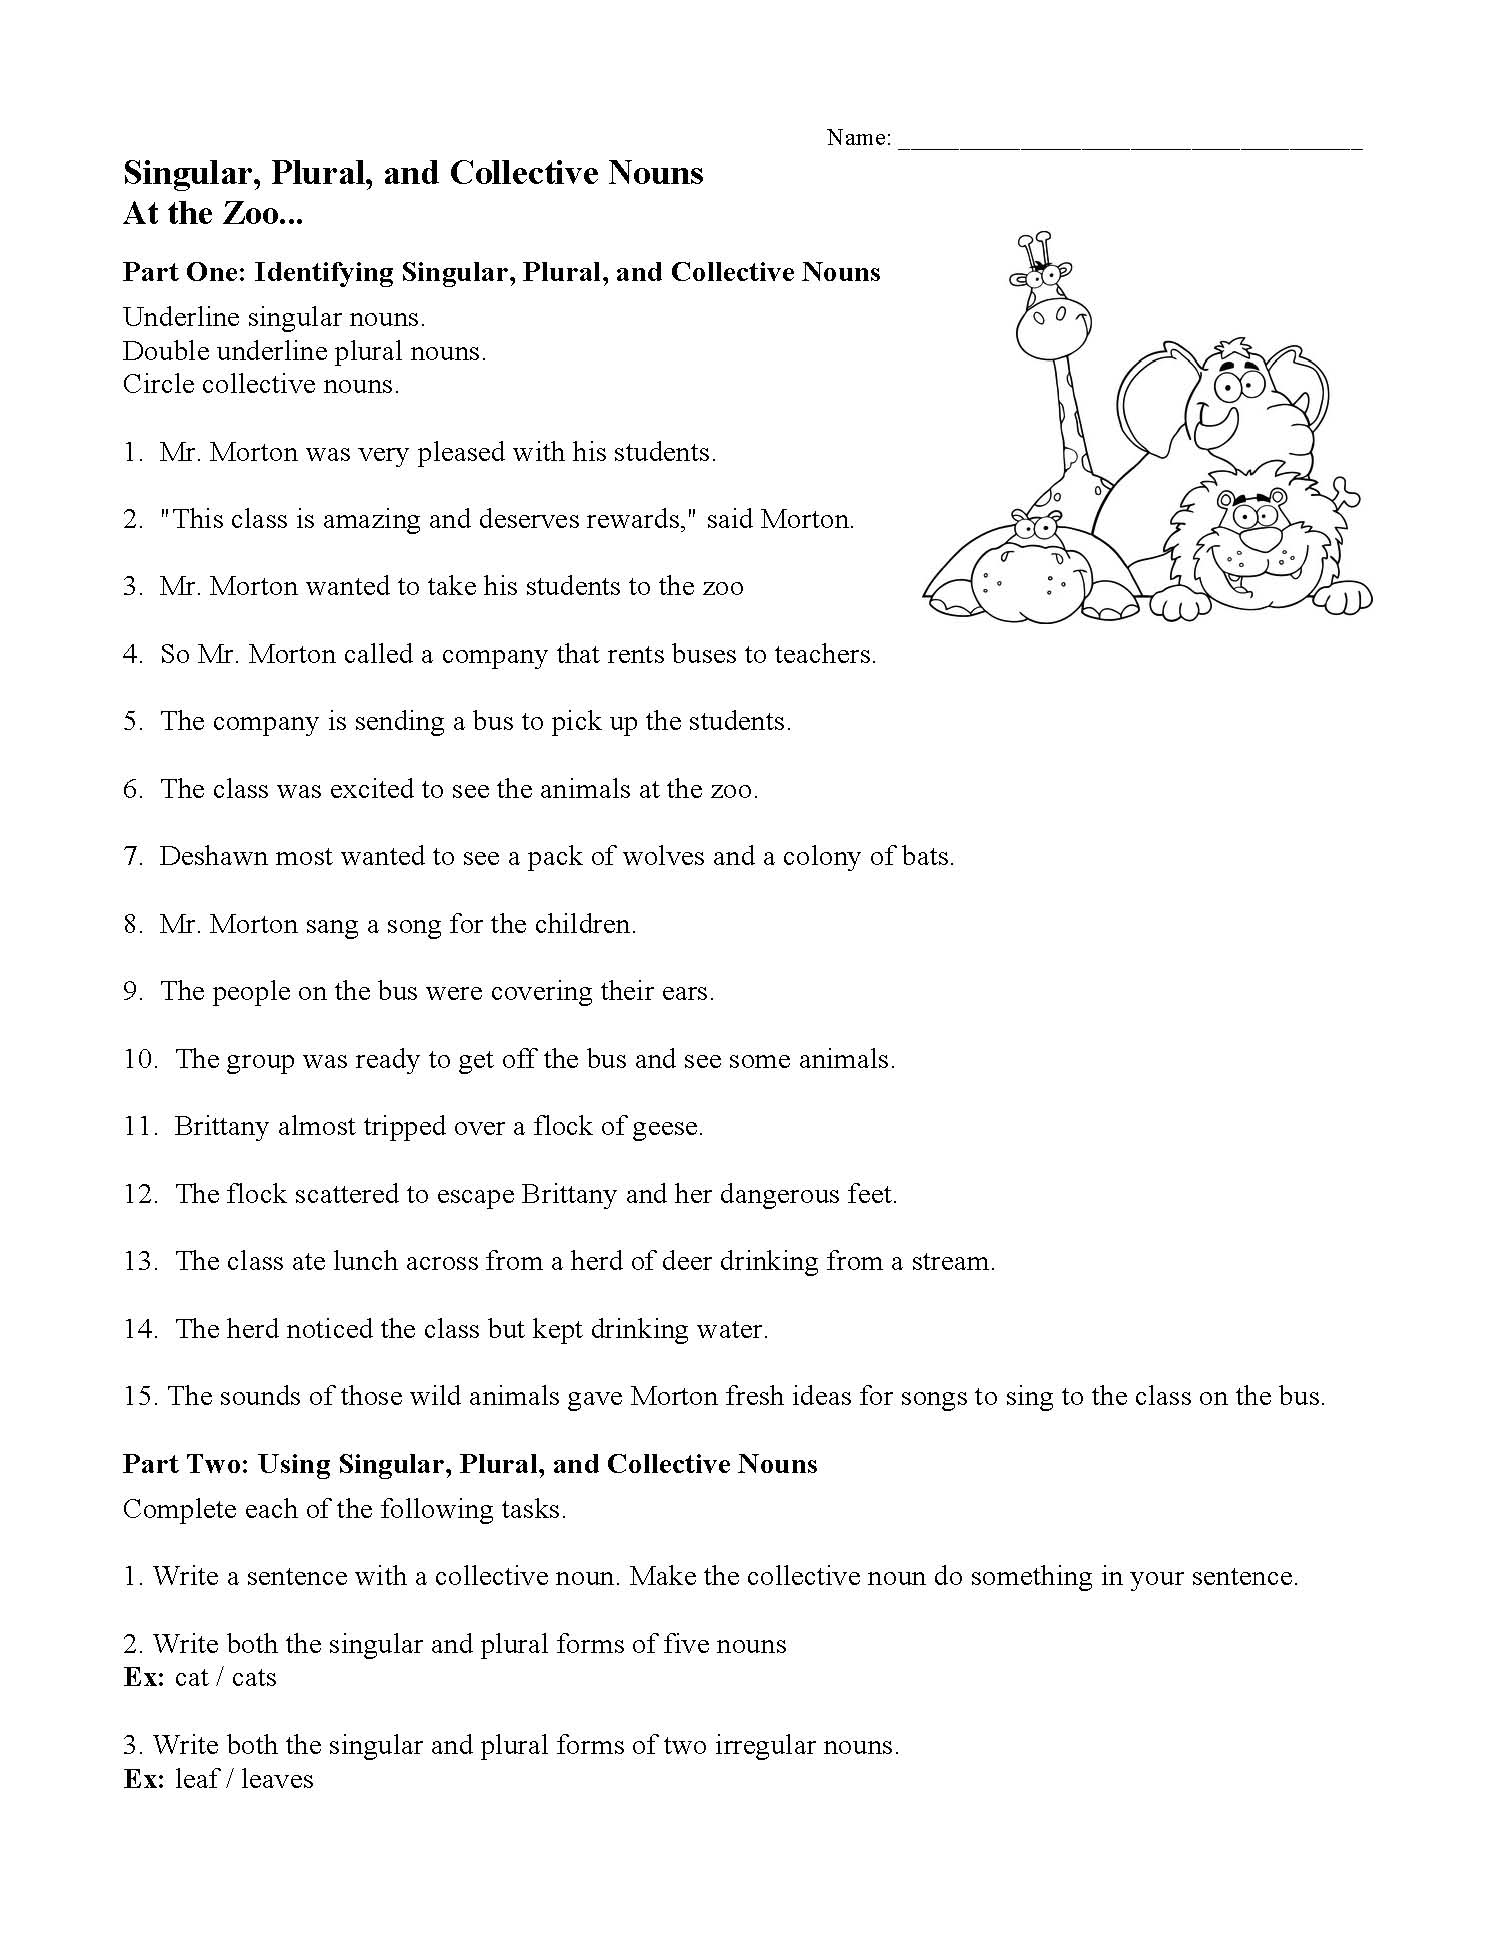 singular-plural-and-collective-nouns-worksheet-at-the-zoo